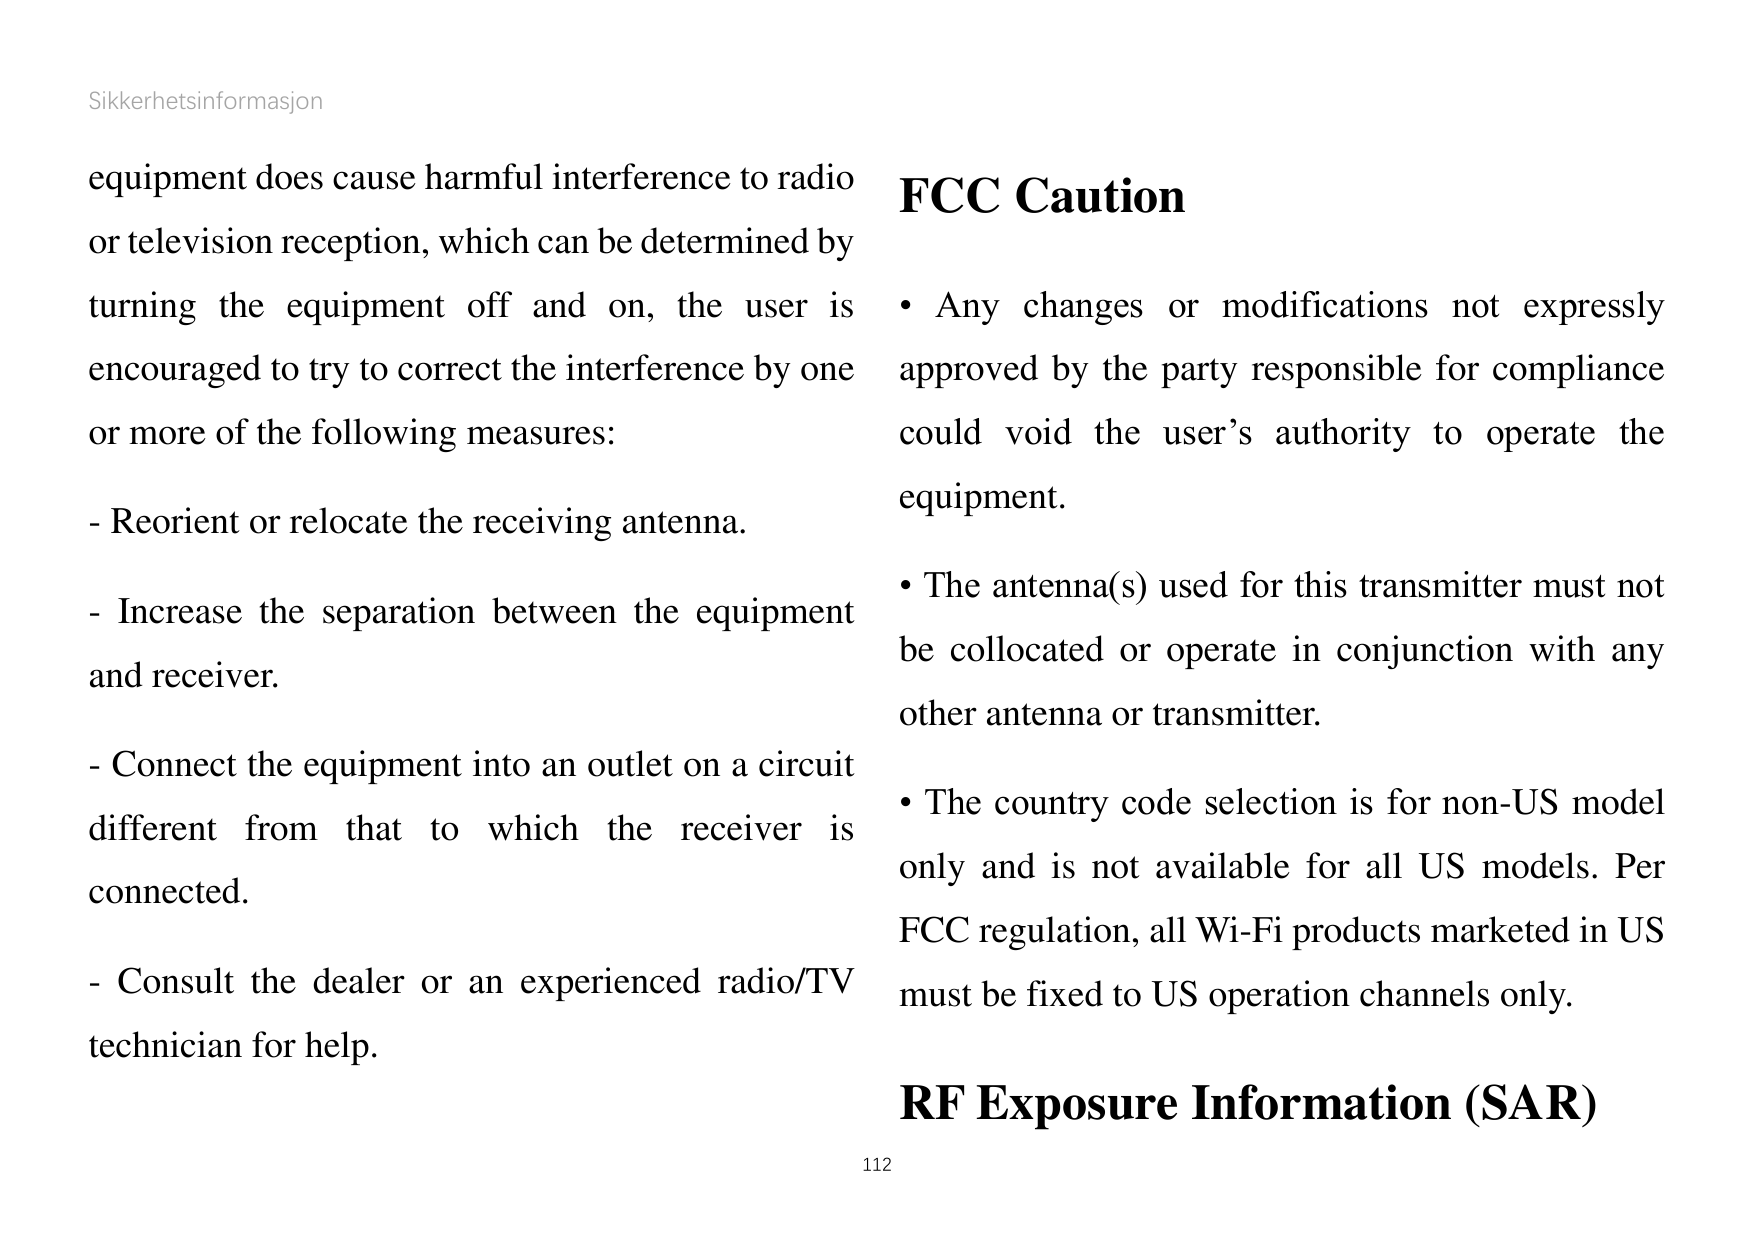 Sikkerhetsinformasjonequipment does cause harmful interference to radioFCC Cautionor television reception, which can be determin